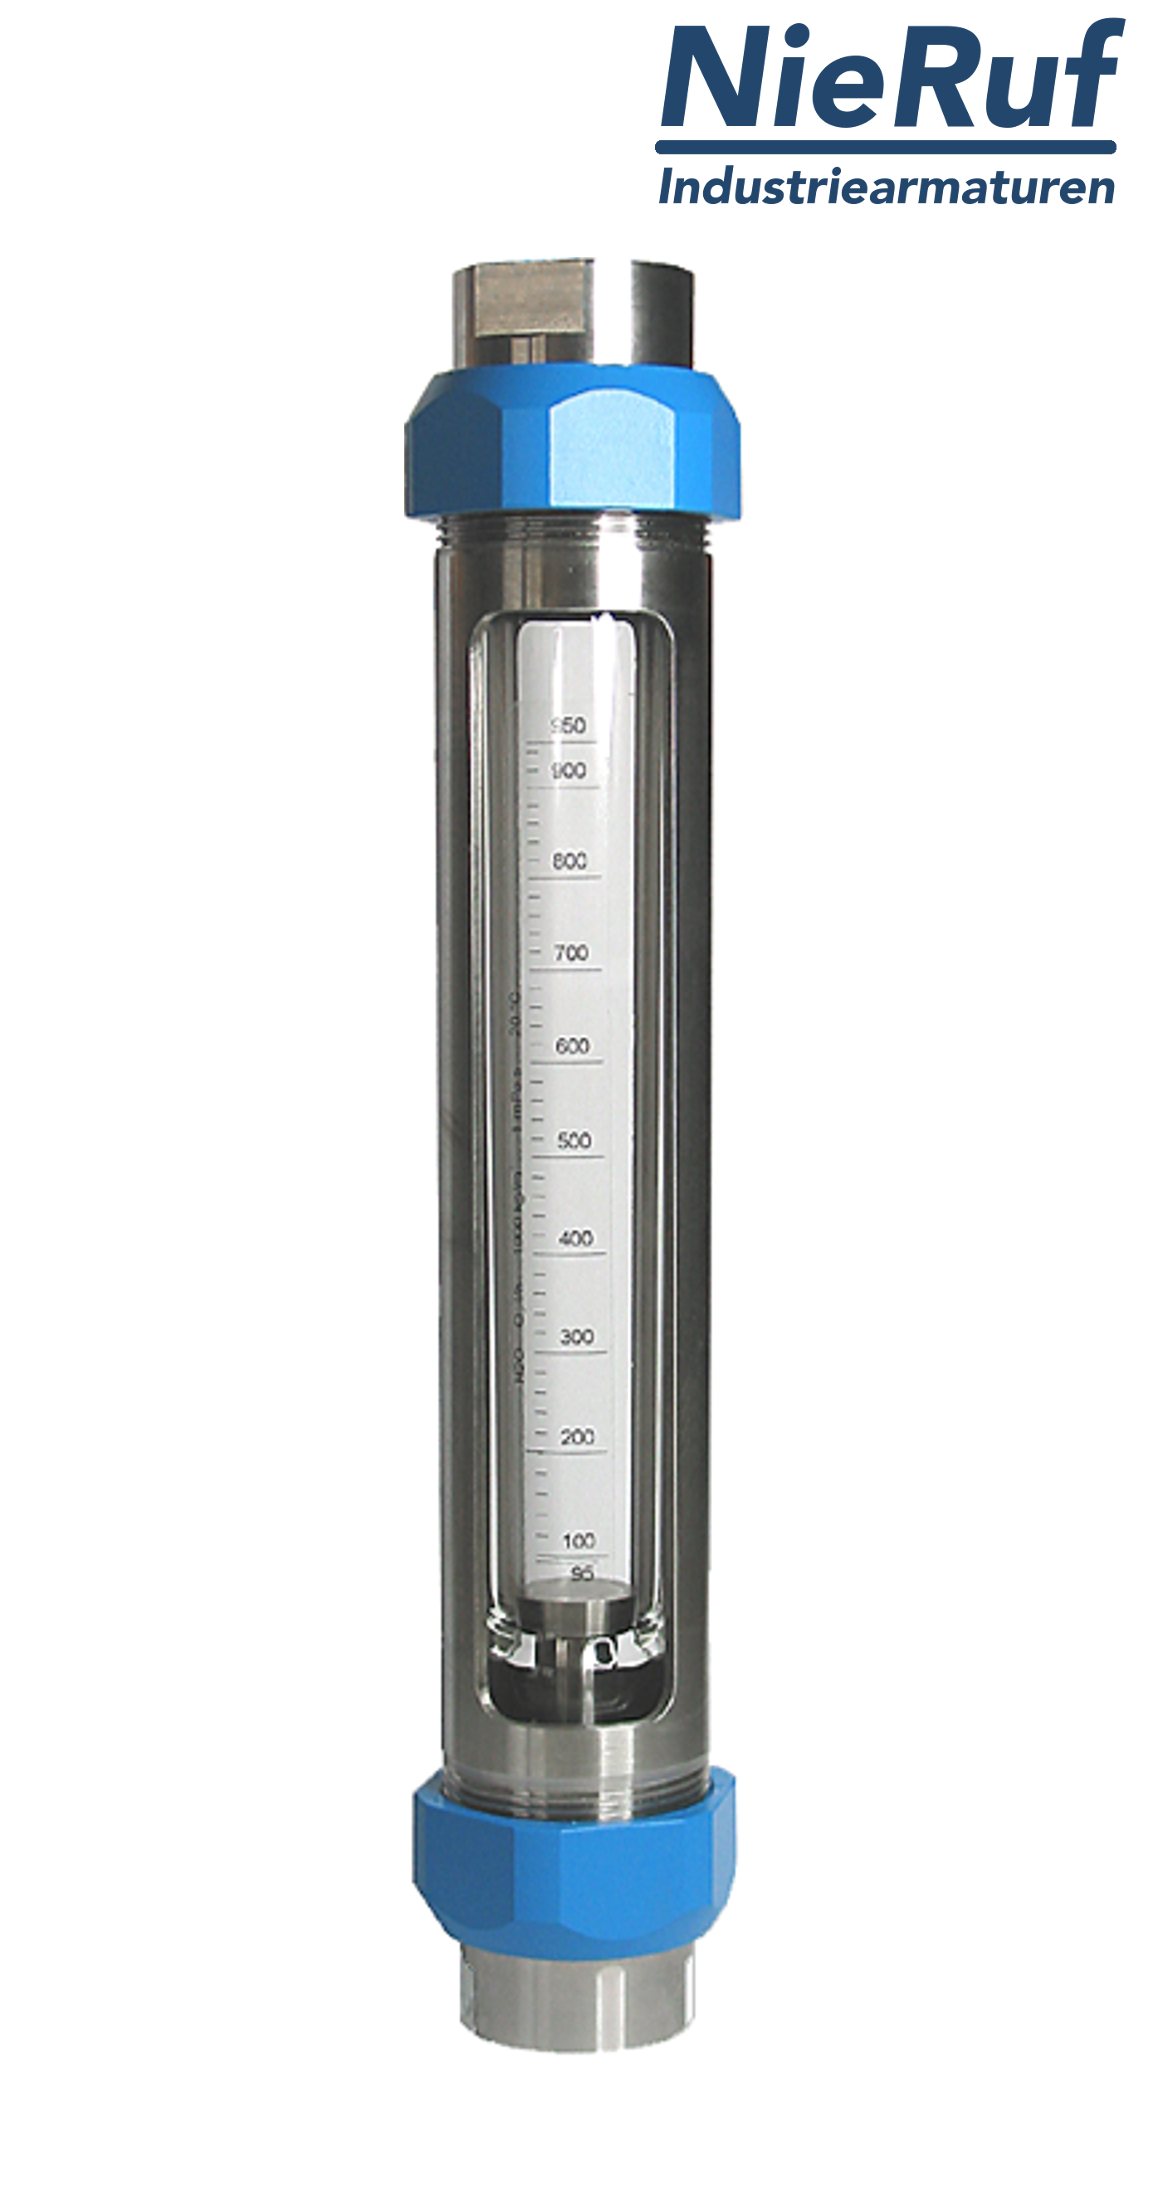 Variable area flowmeter stainless steel + borosilicate 1" Inch 250.0 - 2500 l/h water EPDM